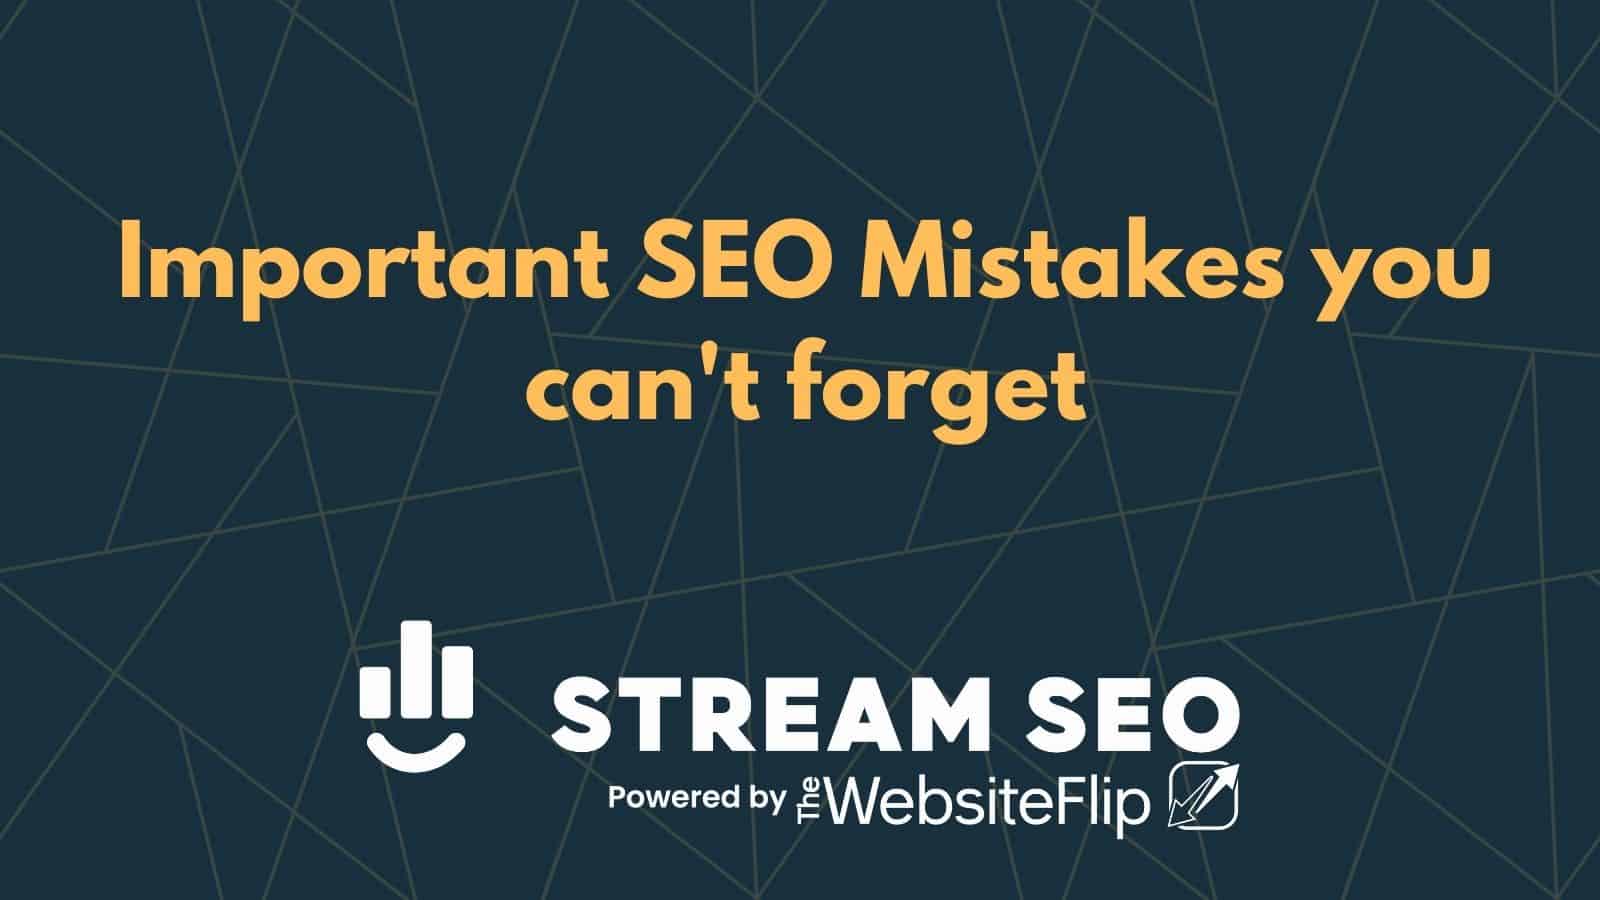 7 important SEO Mistakes you can’t forget in 2013